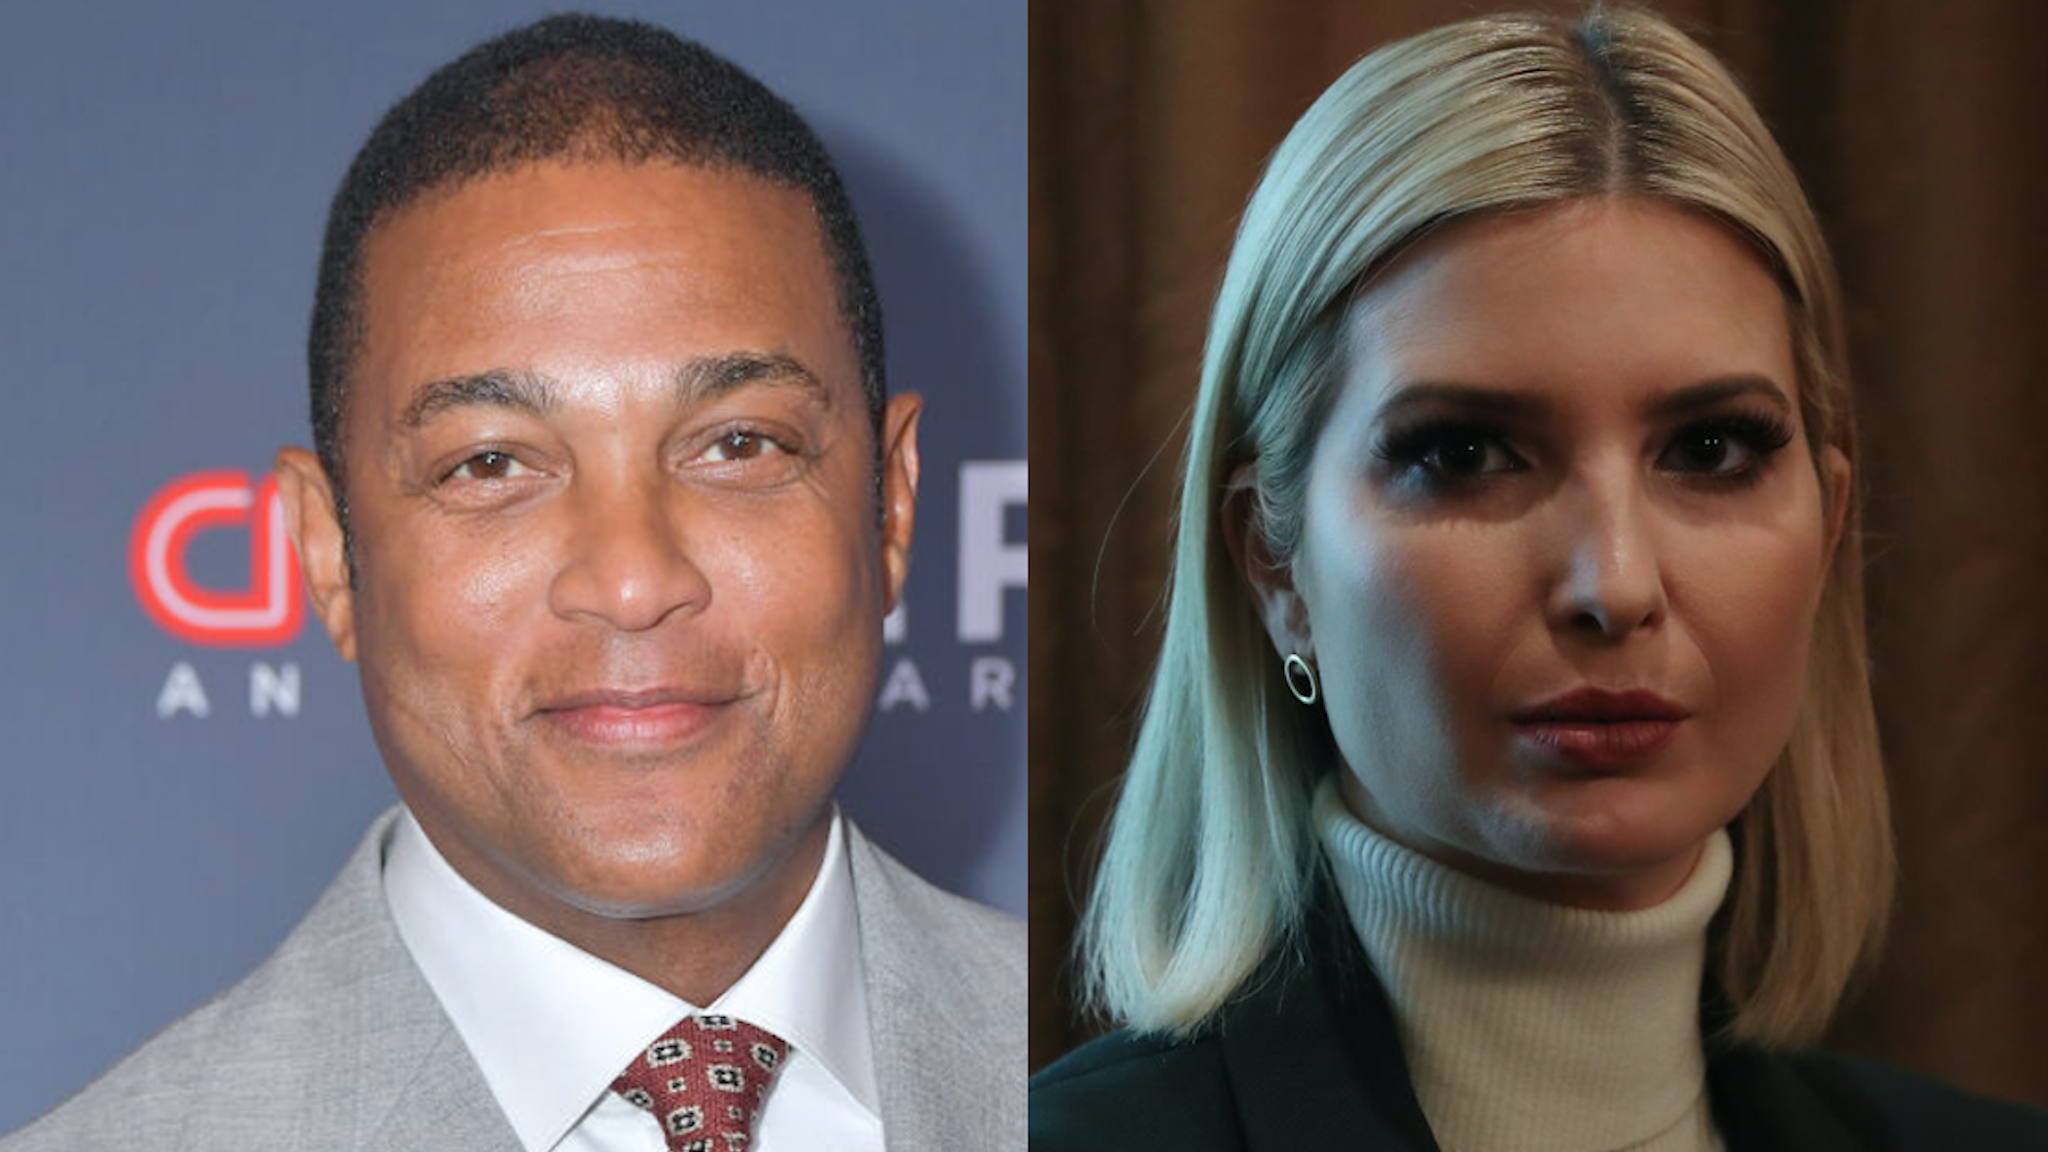 Don Lemon attends CNN Heroes at the American Museum of Natural History on December 08, 2019 in New York City. //White House Senior Advisor Ivanka Trump listens to her father U.S. President Donald Trump speak to the media during a cabinet meeting at the White House on November 19, 2019 in Washington, DC.